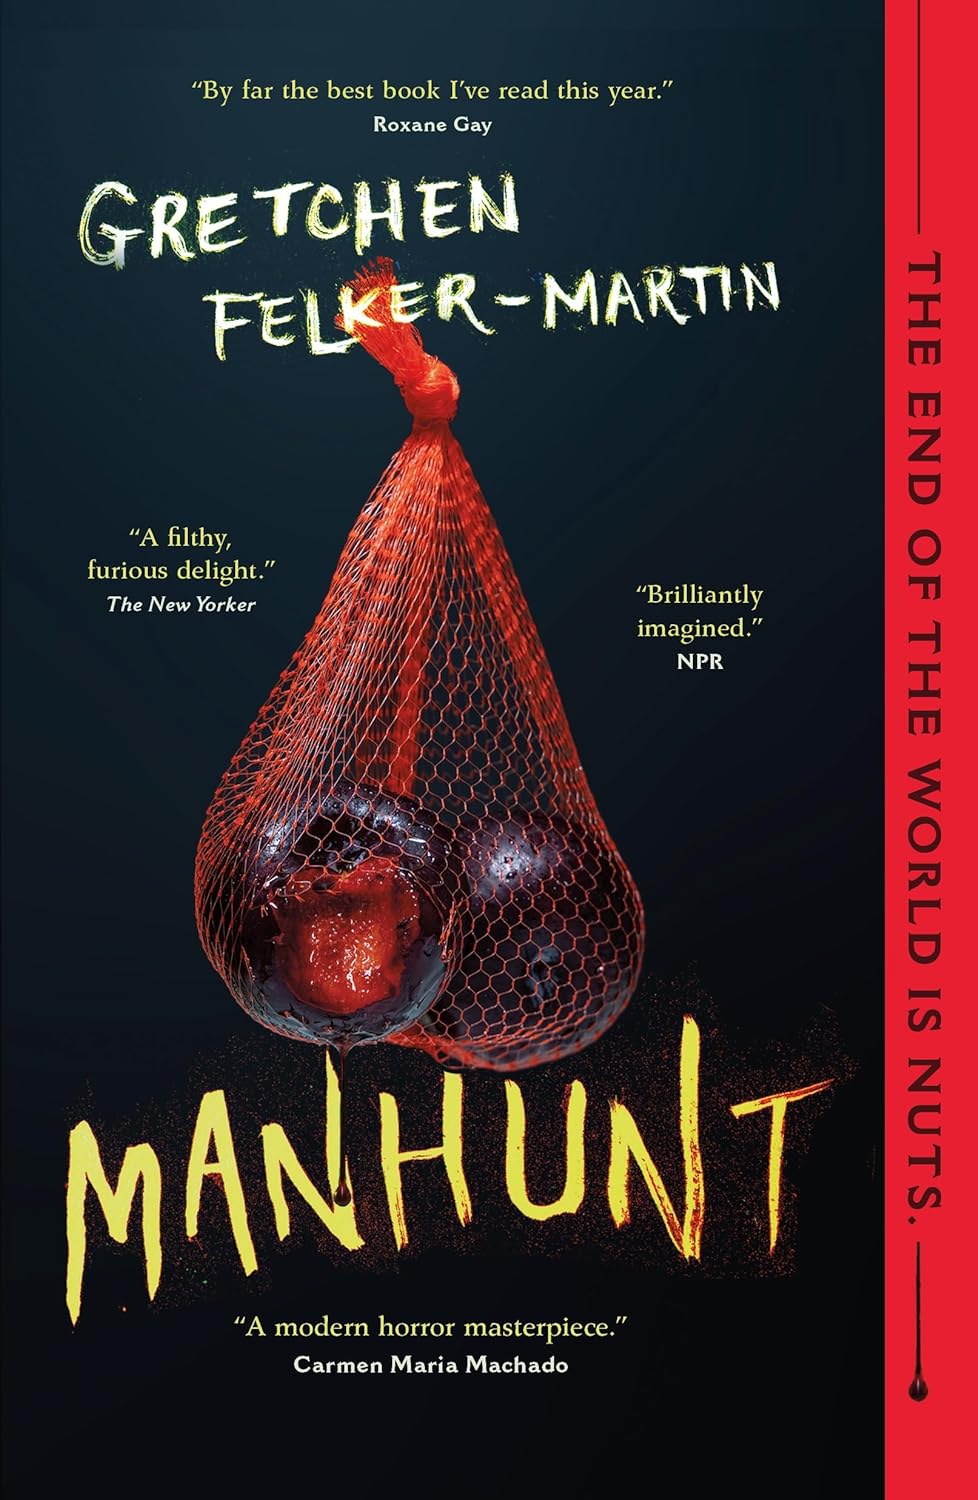 The black book cover for Manhunt shows a pair of plums in a red net bag.